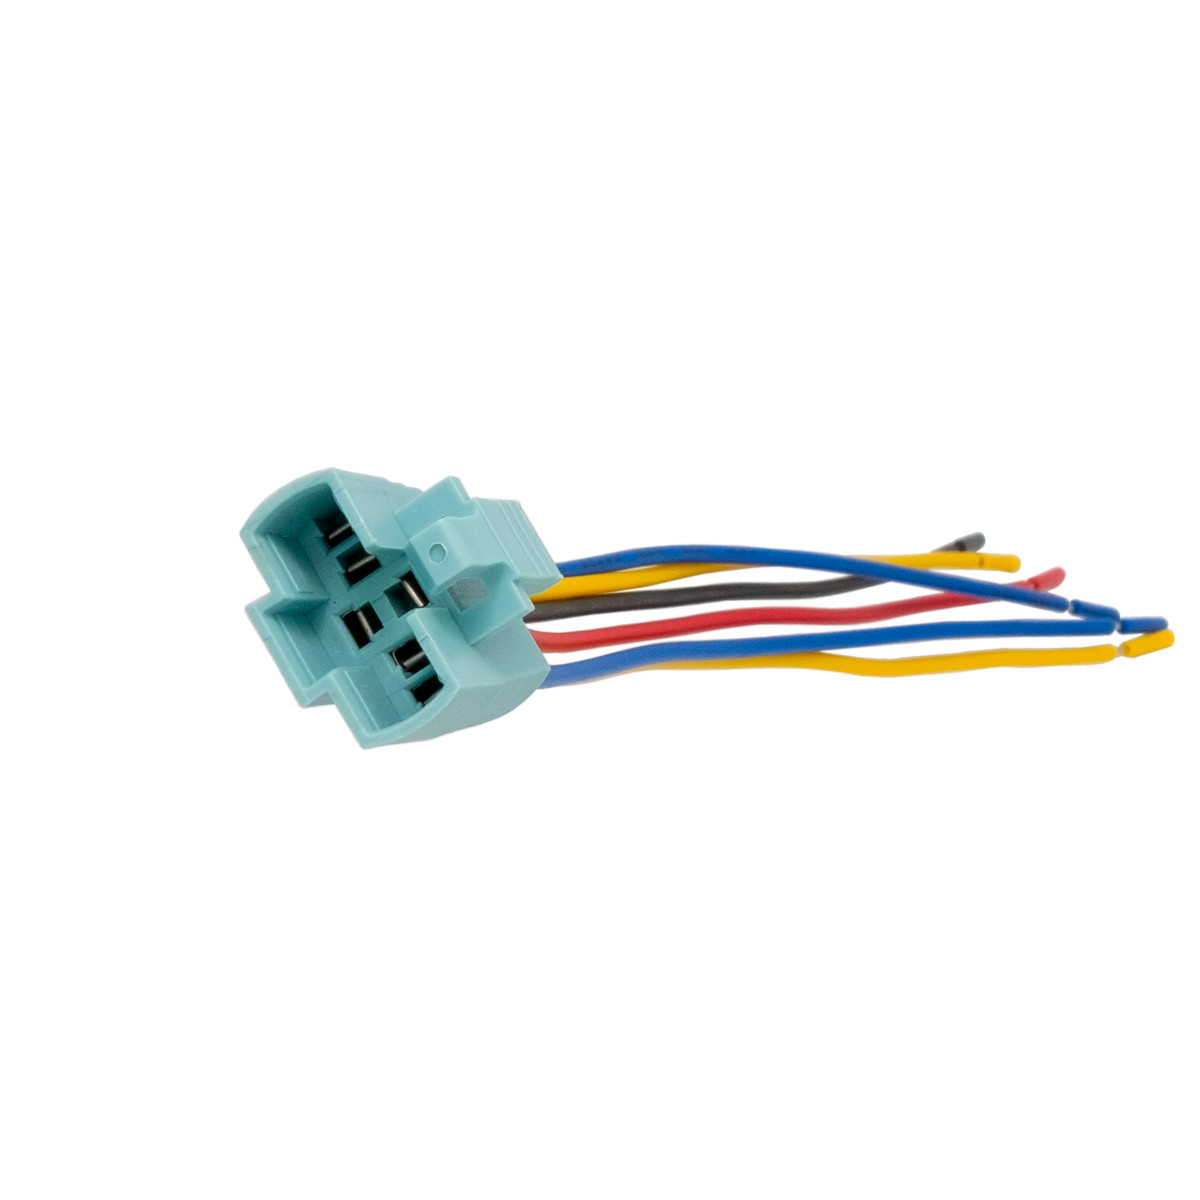 Antivandal conector for switches and pushbuttons